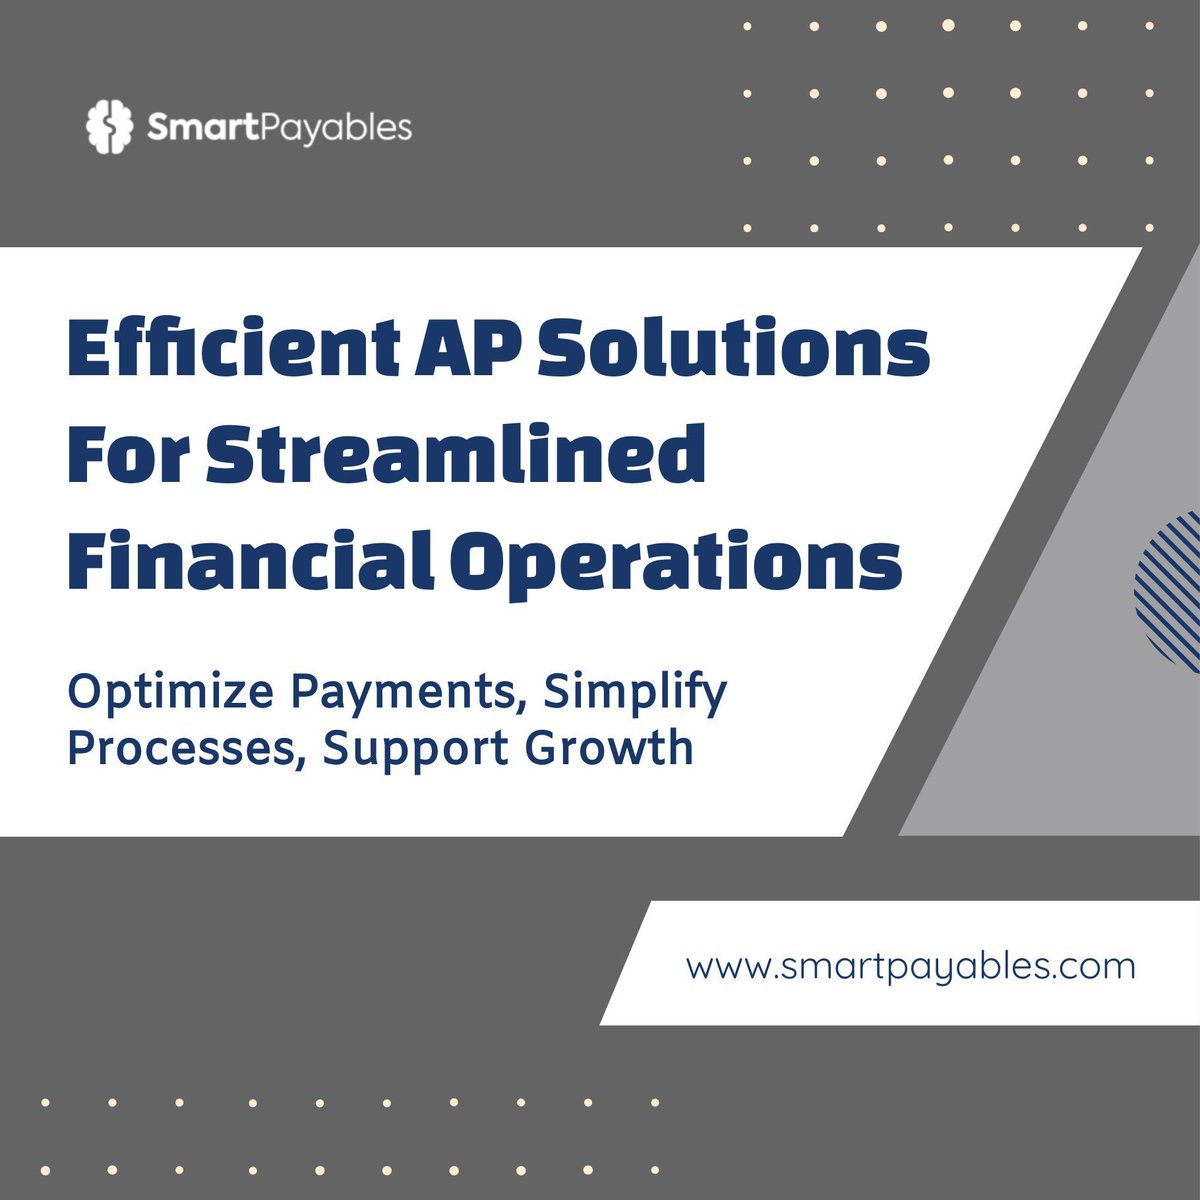 Revolutionize Your Finances with Smart AP Solutions! Optimize payments, simplify processes, and fuel your growth with ease.  #EfficientAP #FinancialOptimization #GrowthSupport